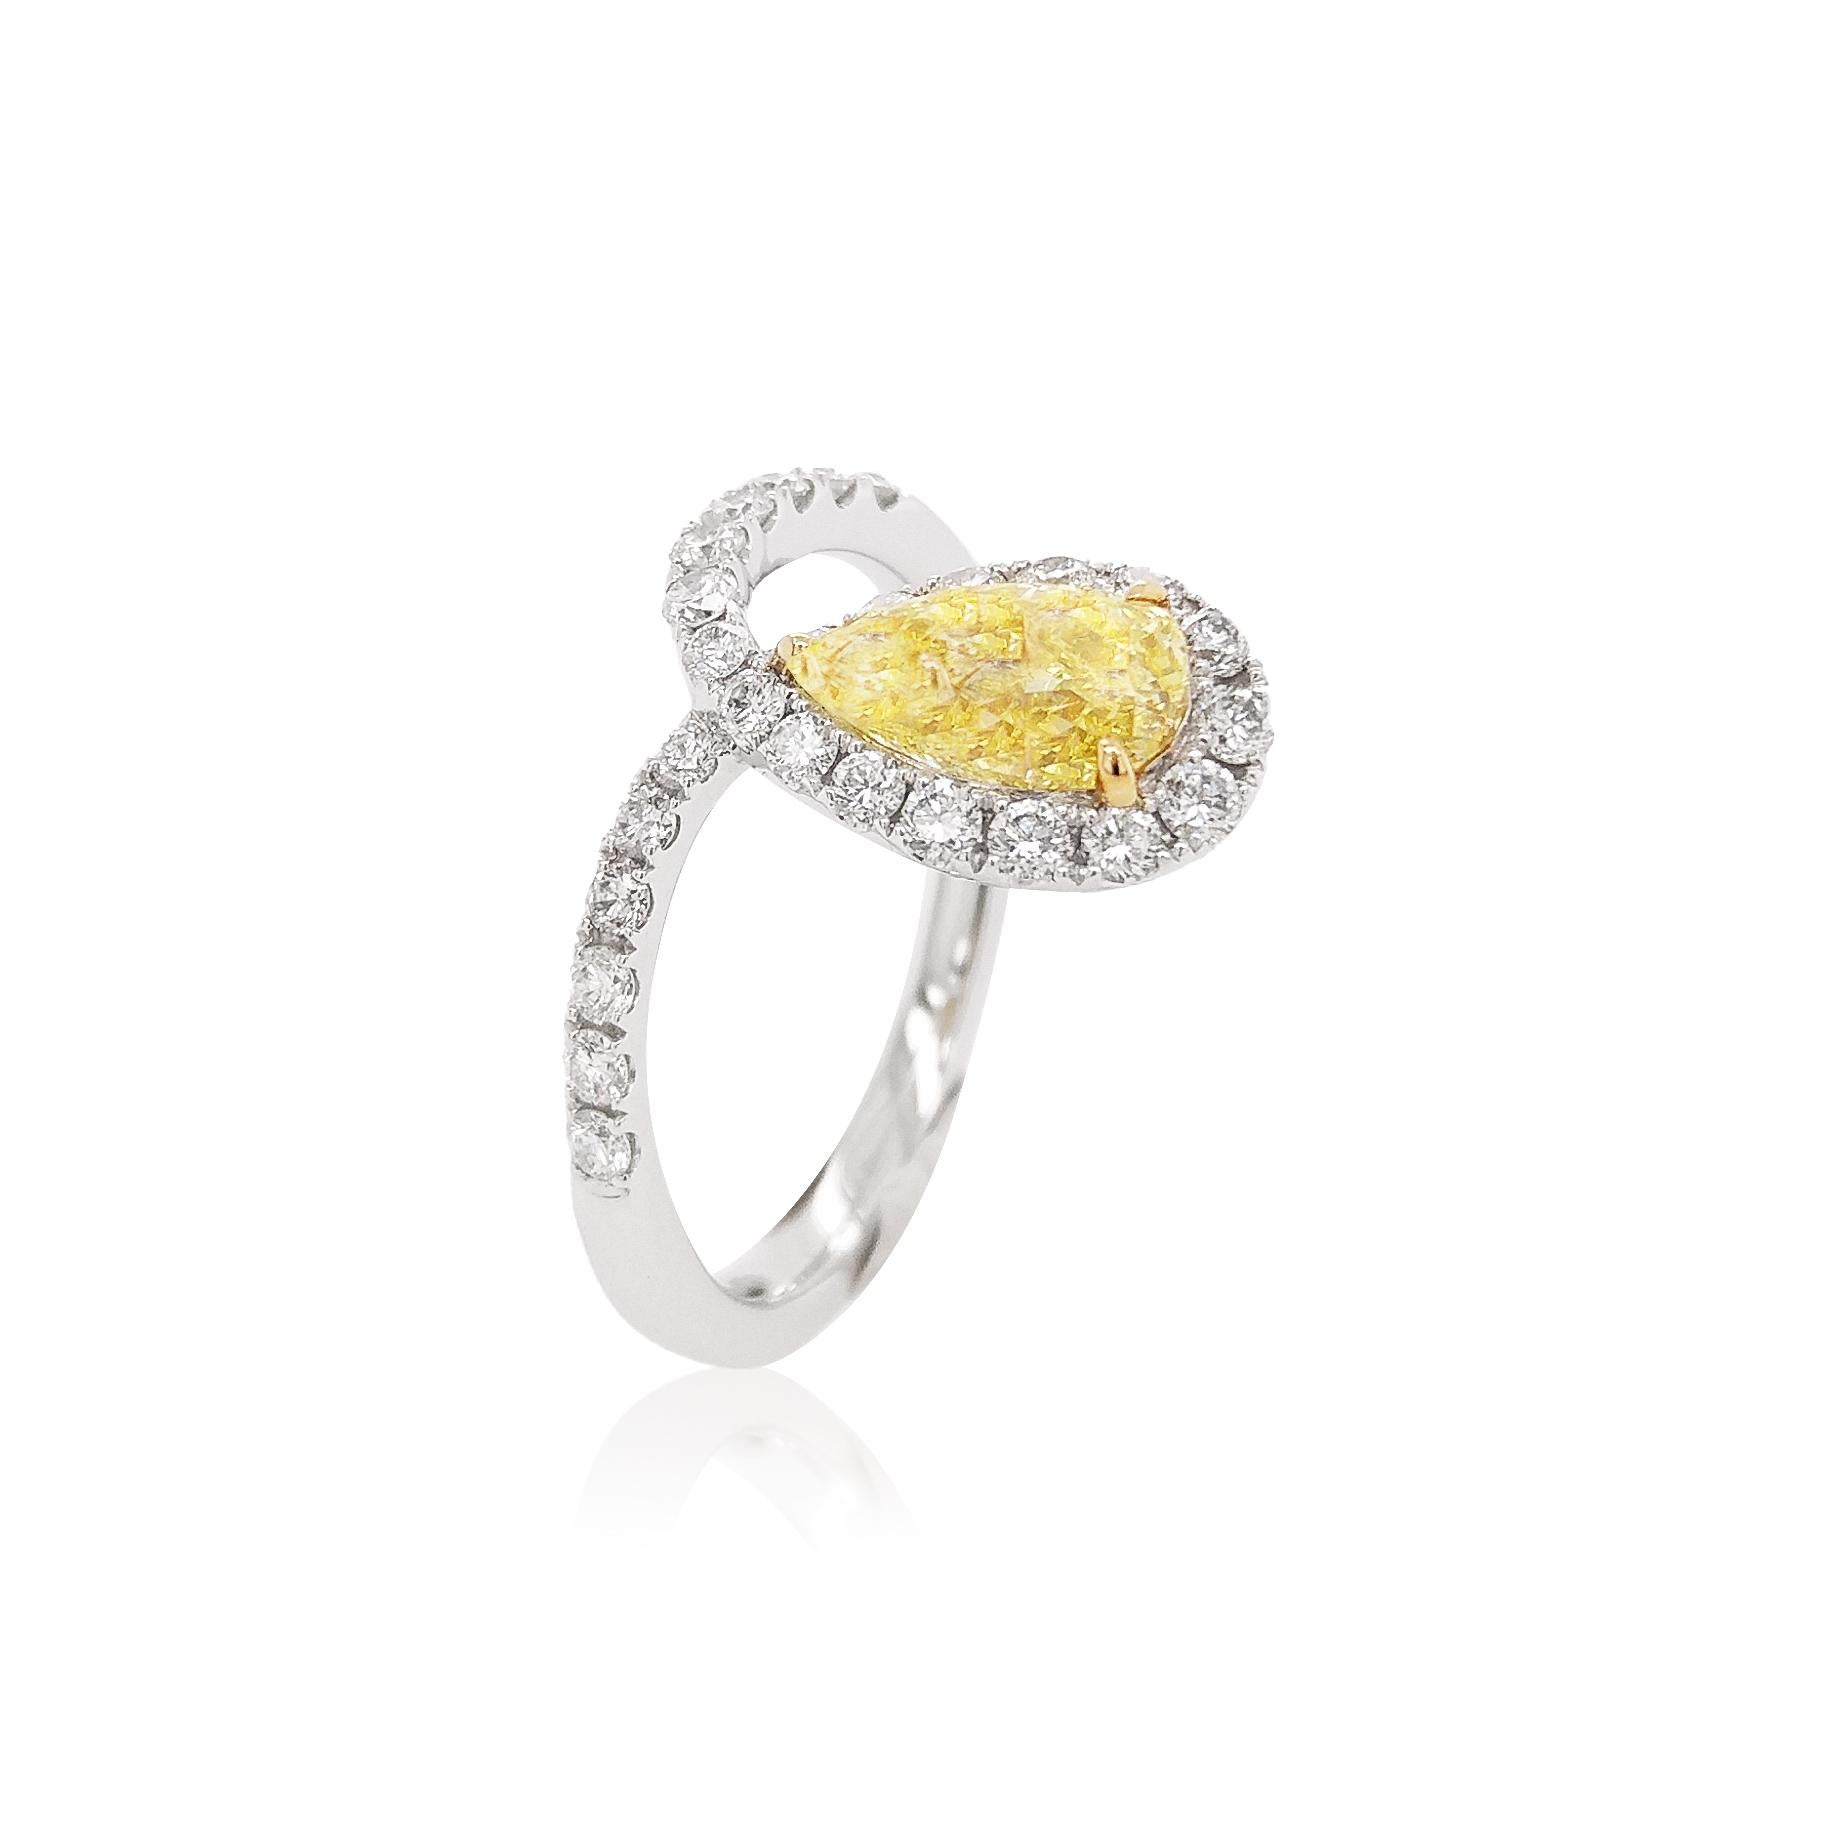 Contemporary HYT GIA Certified Fancy Intense Yellow Diamond and White Diamond Engagement Ring